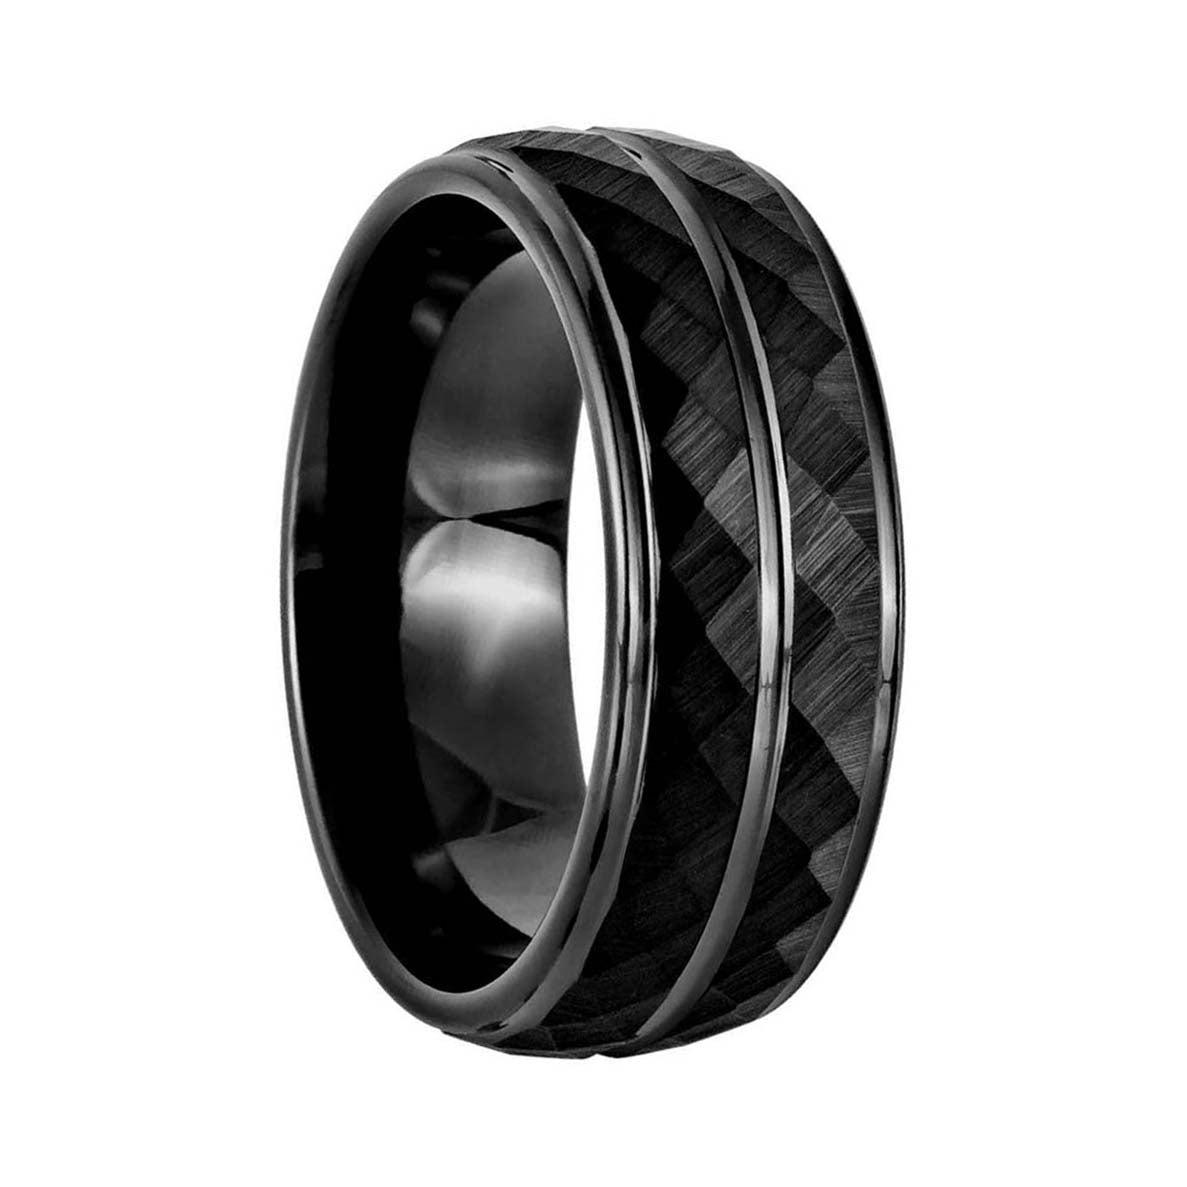 Geometric Faceted Black Tungsten Men's Wedding Band with Dual Grooves